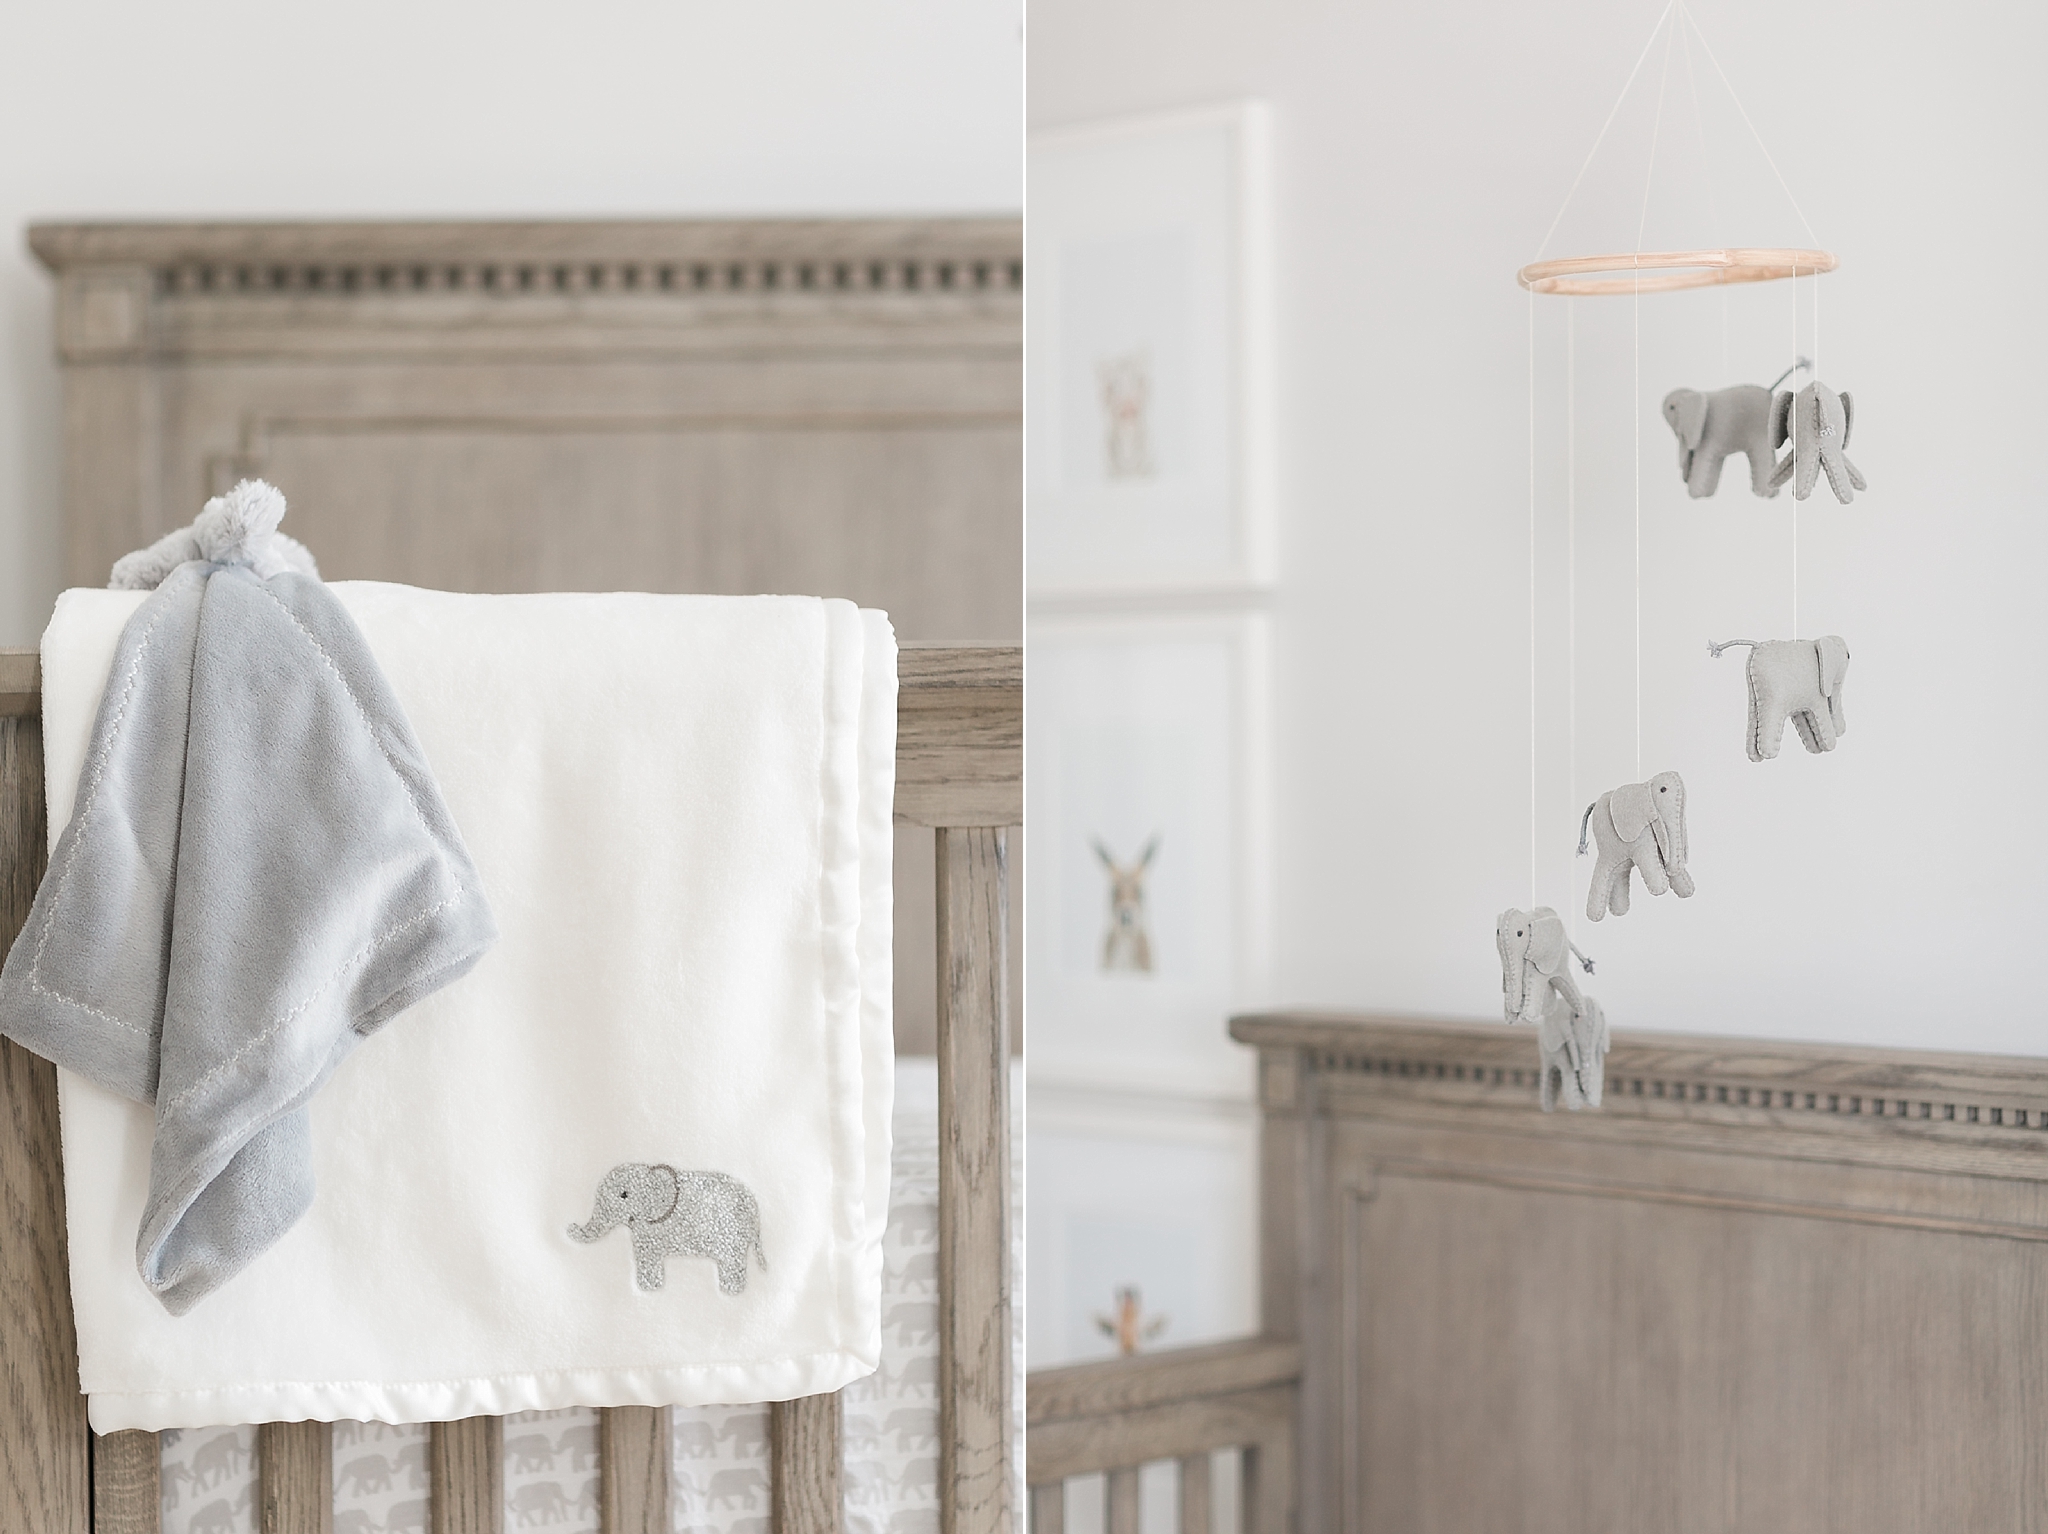 This chic grey and blue nursery for a baby boy features Restoration Hardware furniture, an upgraded closet, and elephant decor. 